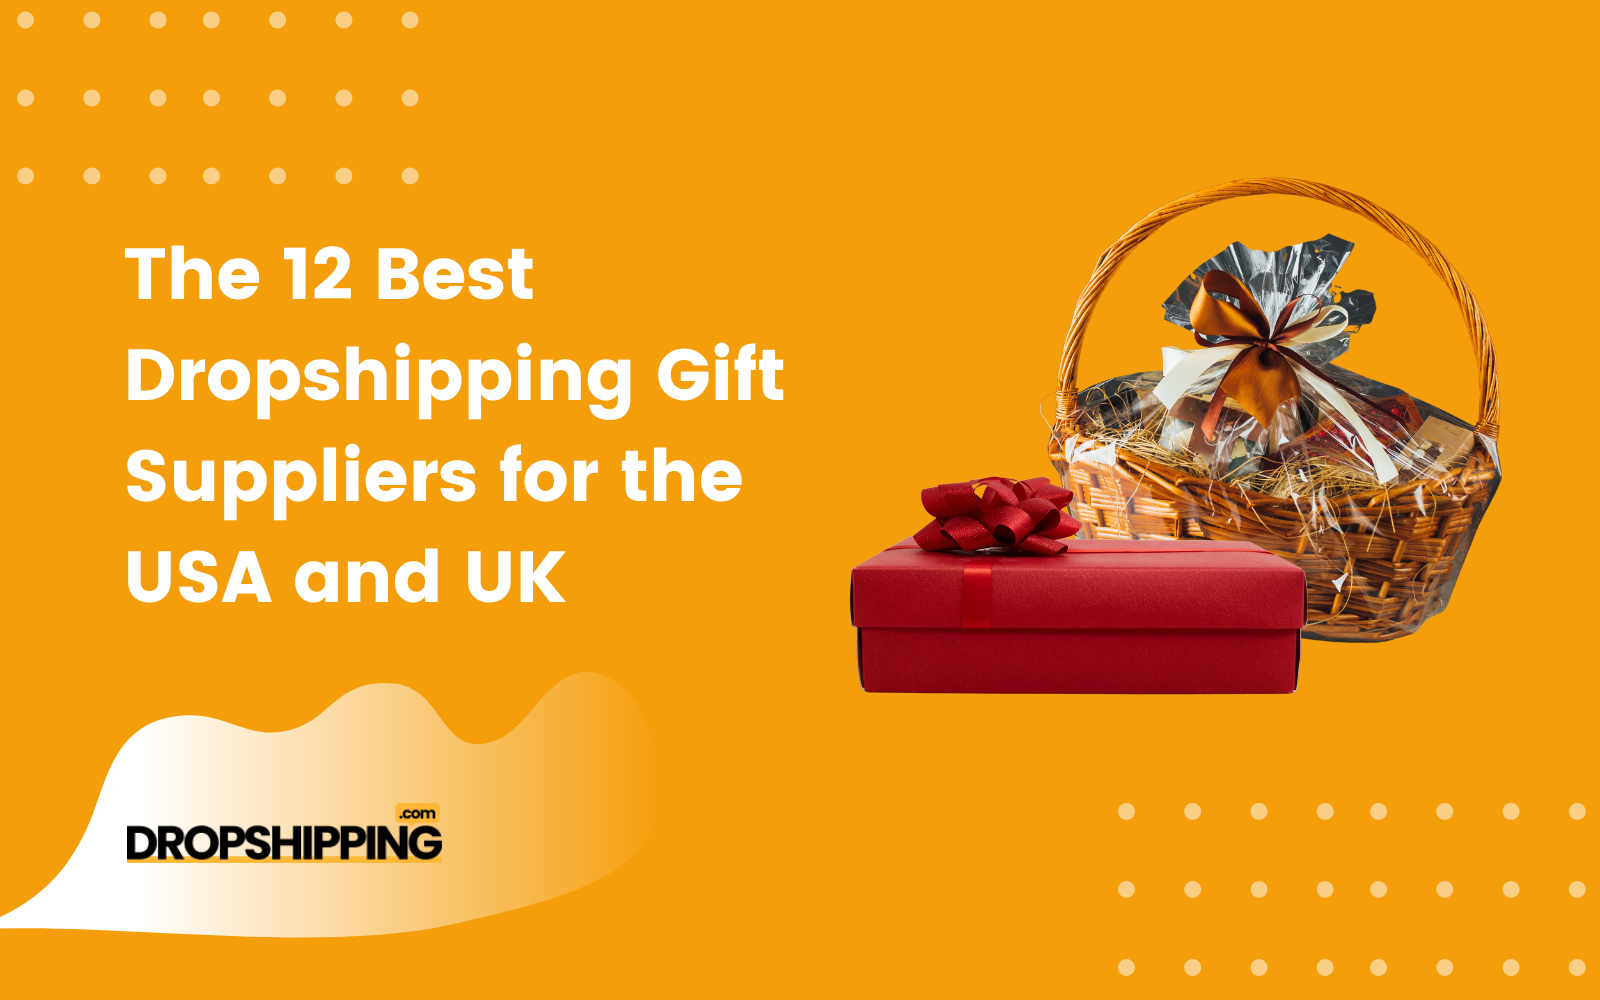 12 best dropshipping gift suppliers for USA and UK dropship gifts gift baskets personalized giftspng